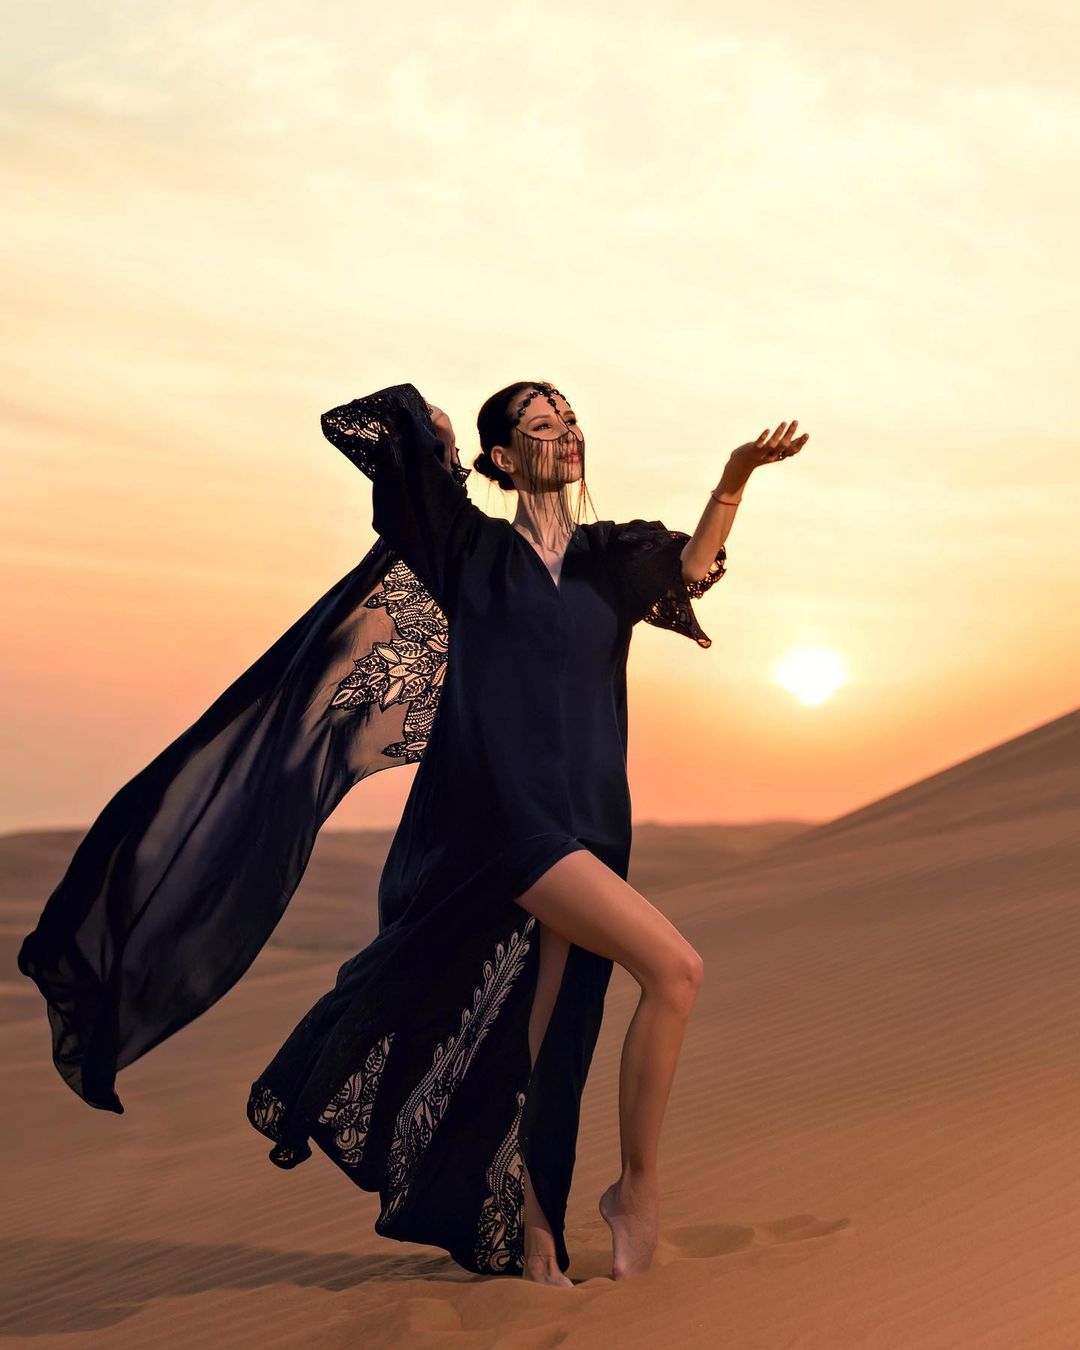 A woman in black abaya and niqab poses alone in the Dubai desert, standing on a sand dune overlooking the vast empty desert landscape.